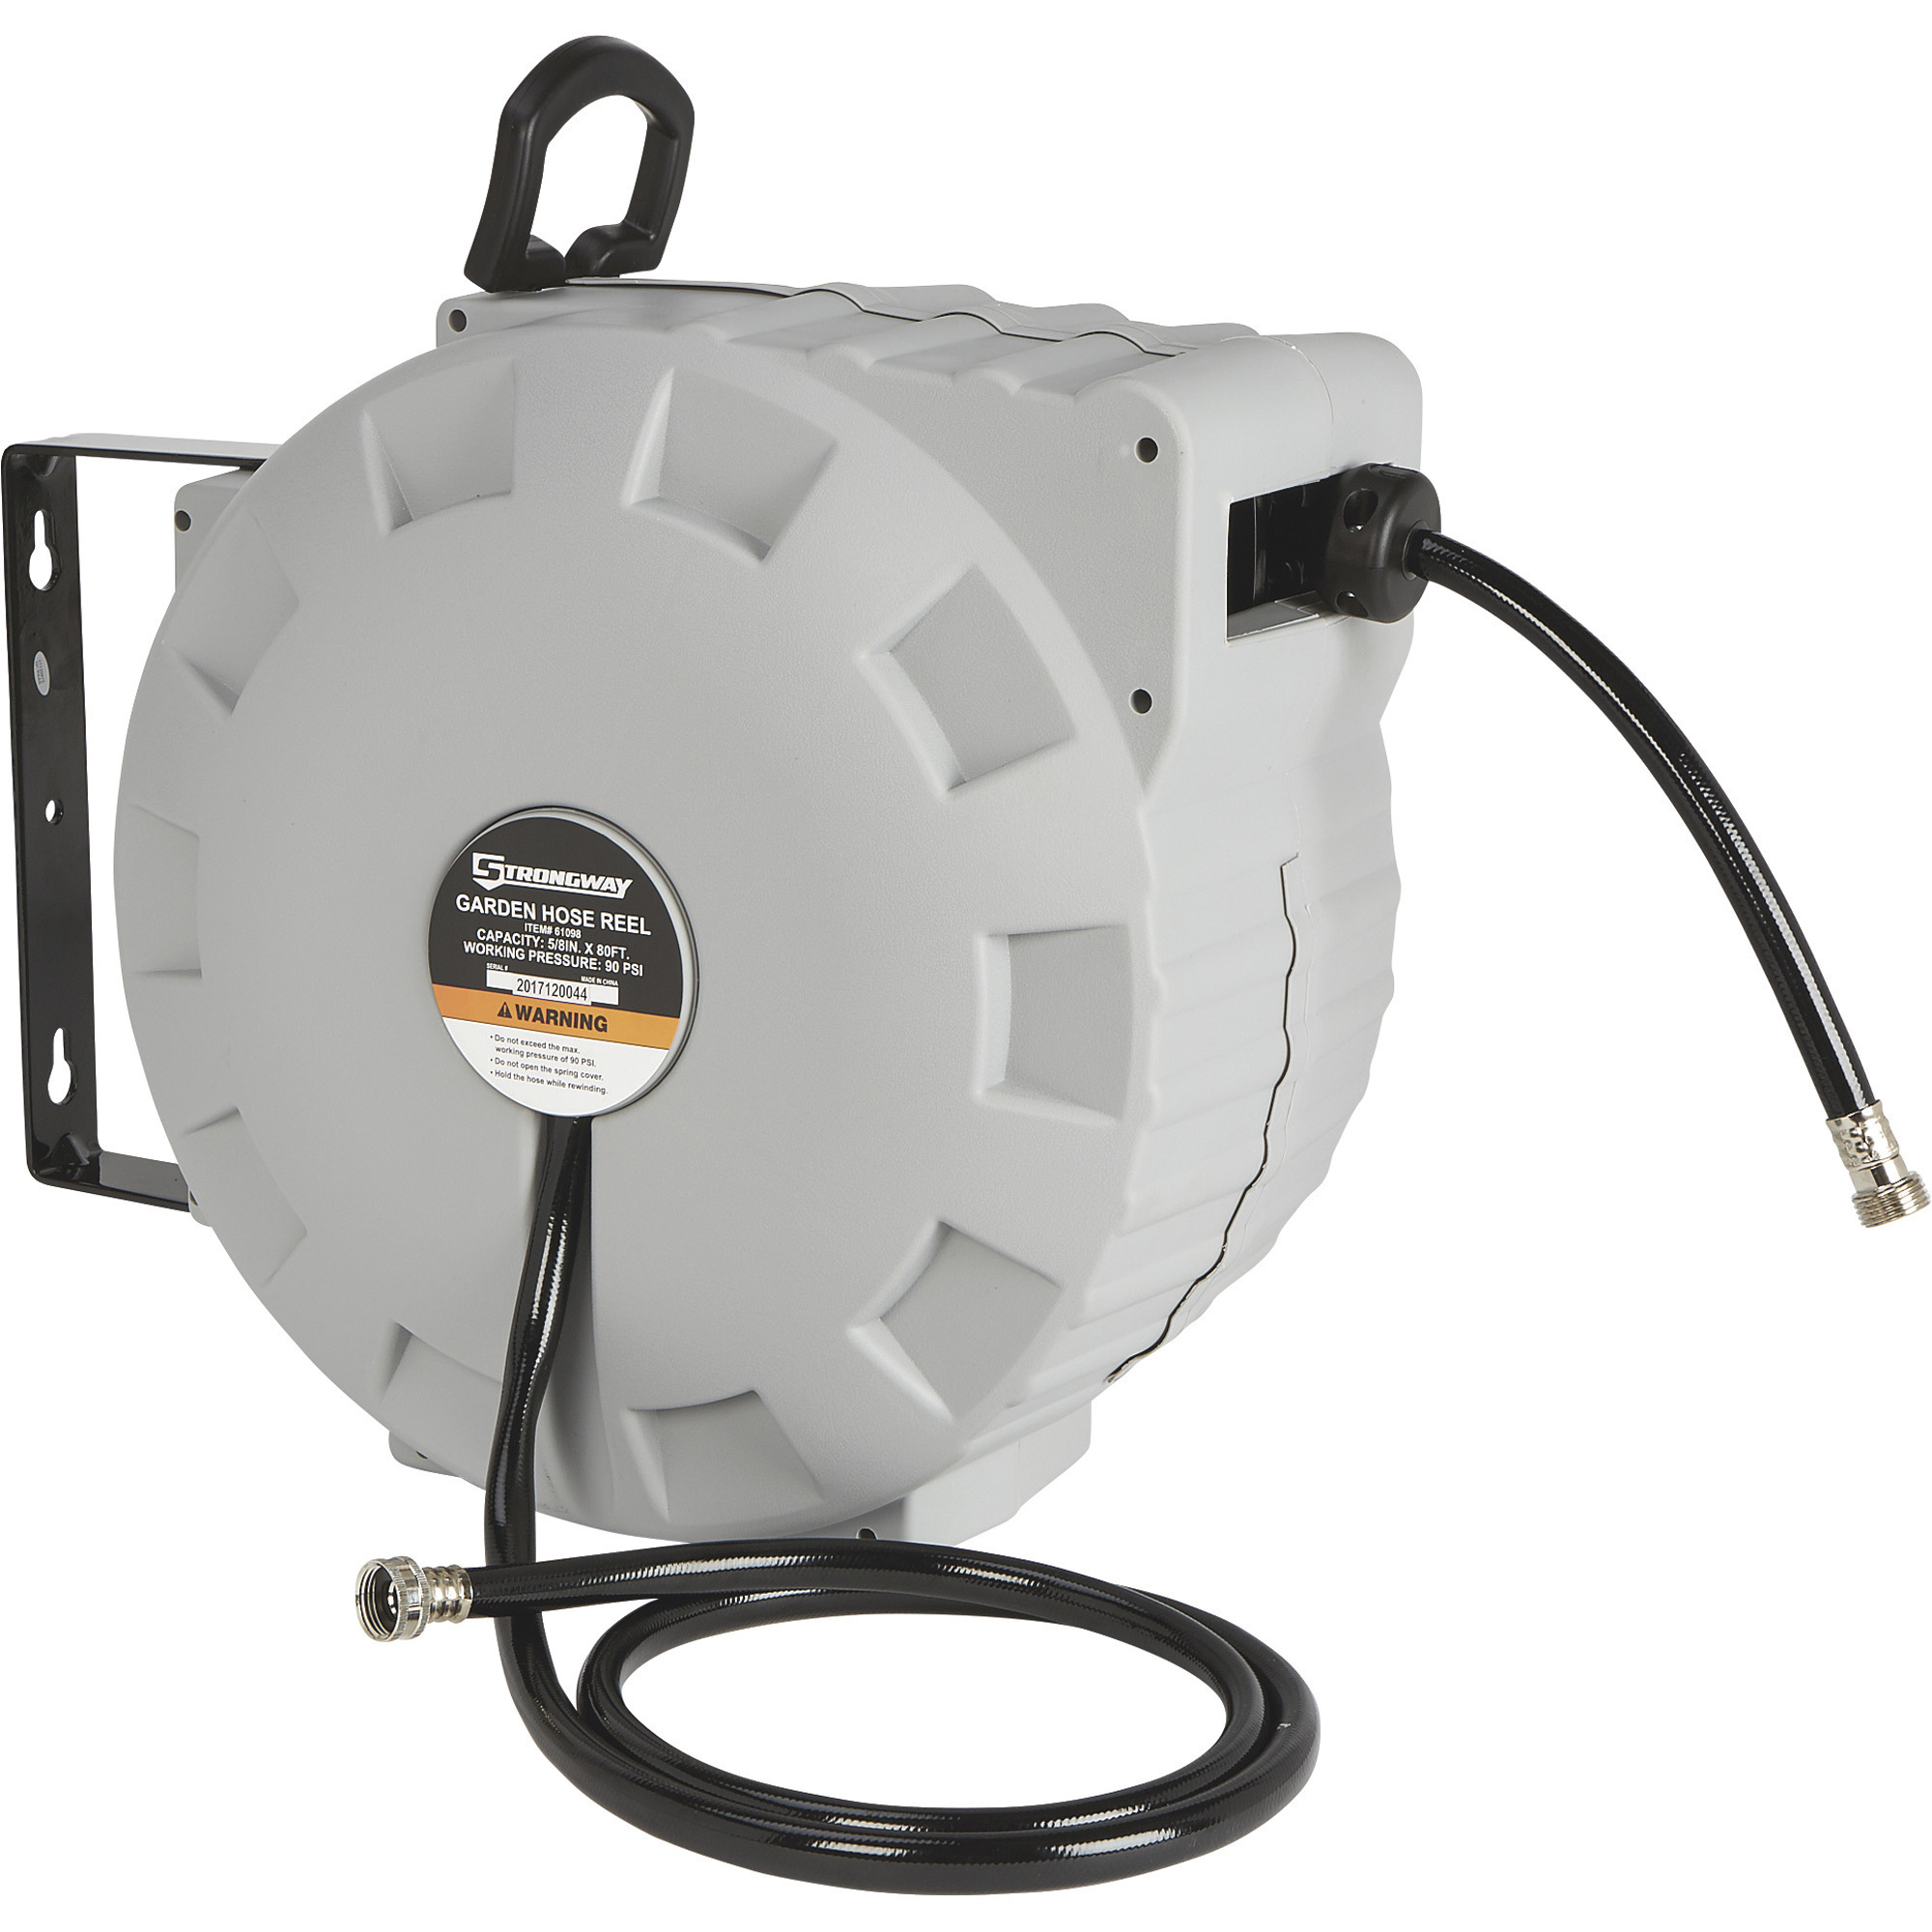 Automatic Retractable Air Water Hose Reel For High Pressure Wall